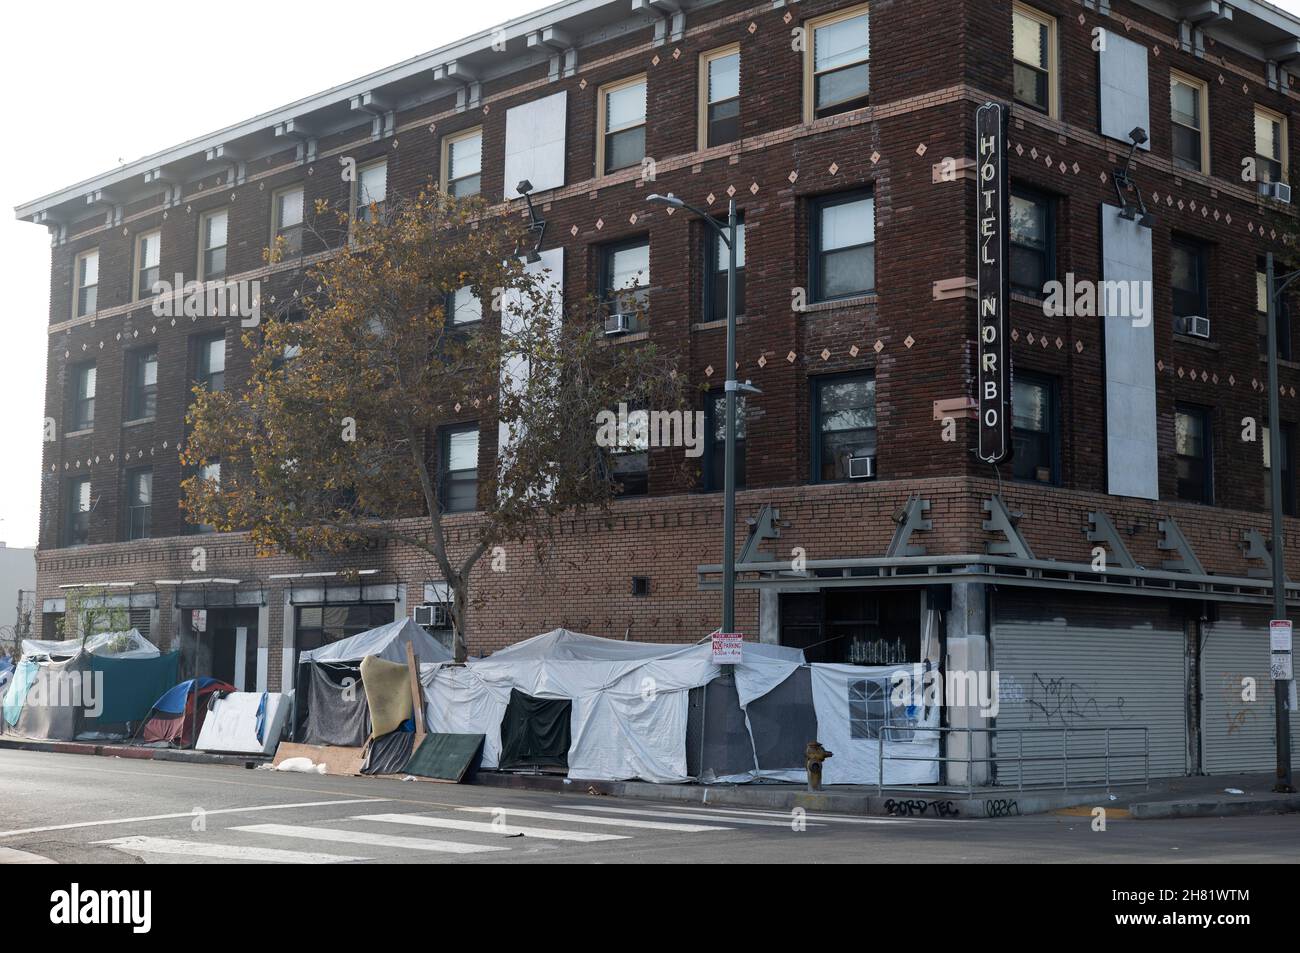 Los Angeles, CA USA - November 20, 2021: Homeless tents line th sidewalk in front of an old run down hotel the Hotel Norbo on skid row Stock Photo